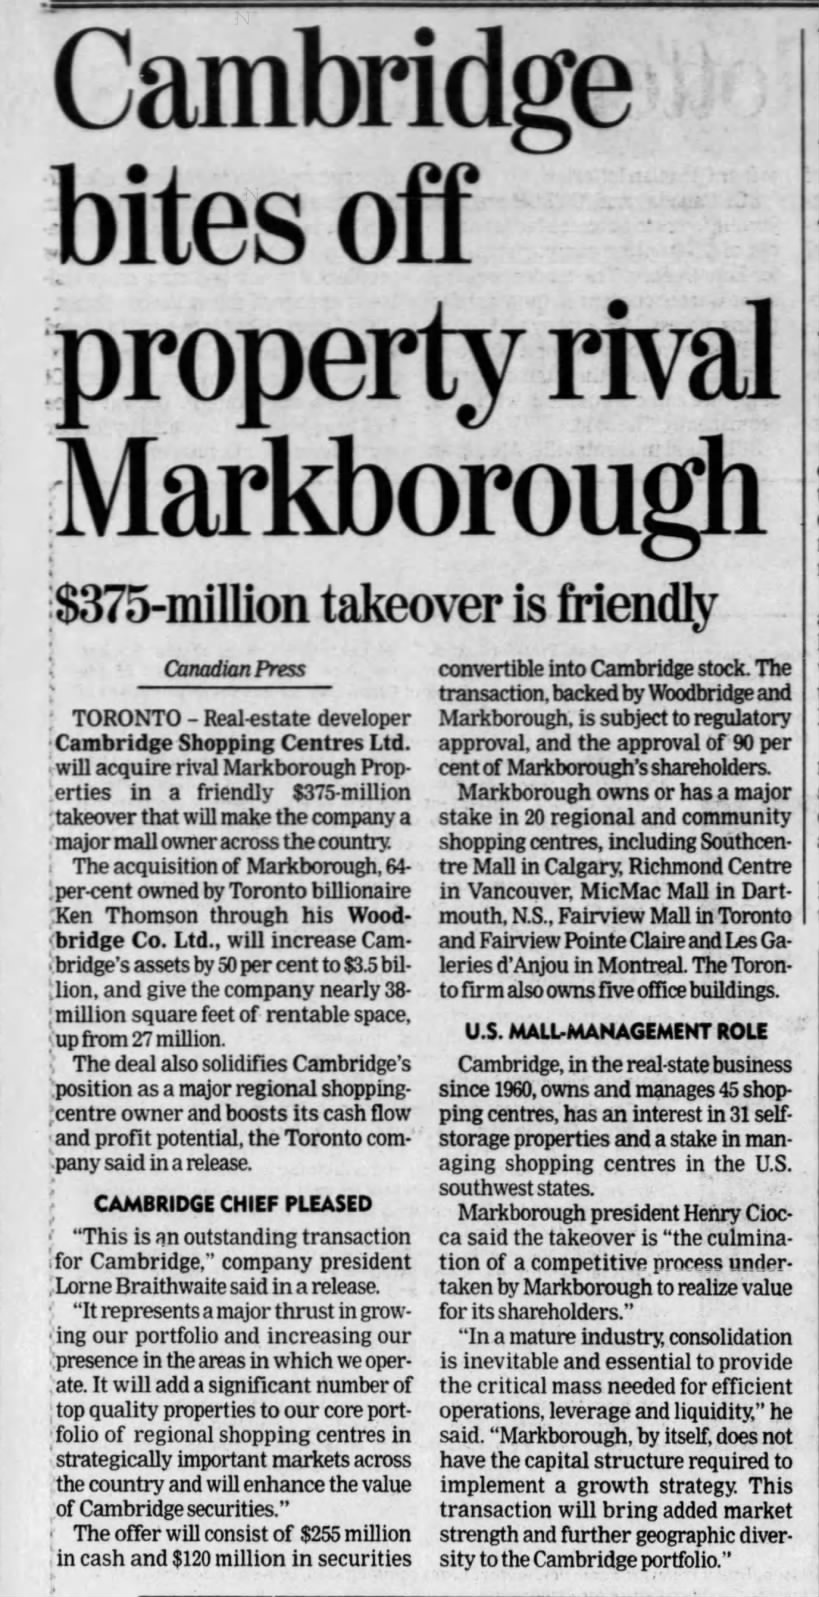 Cambridge bites off property rival Markborough: $375-million takeover is friendly